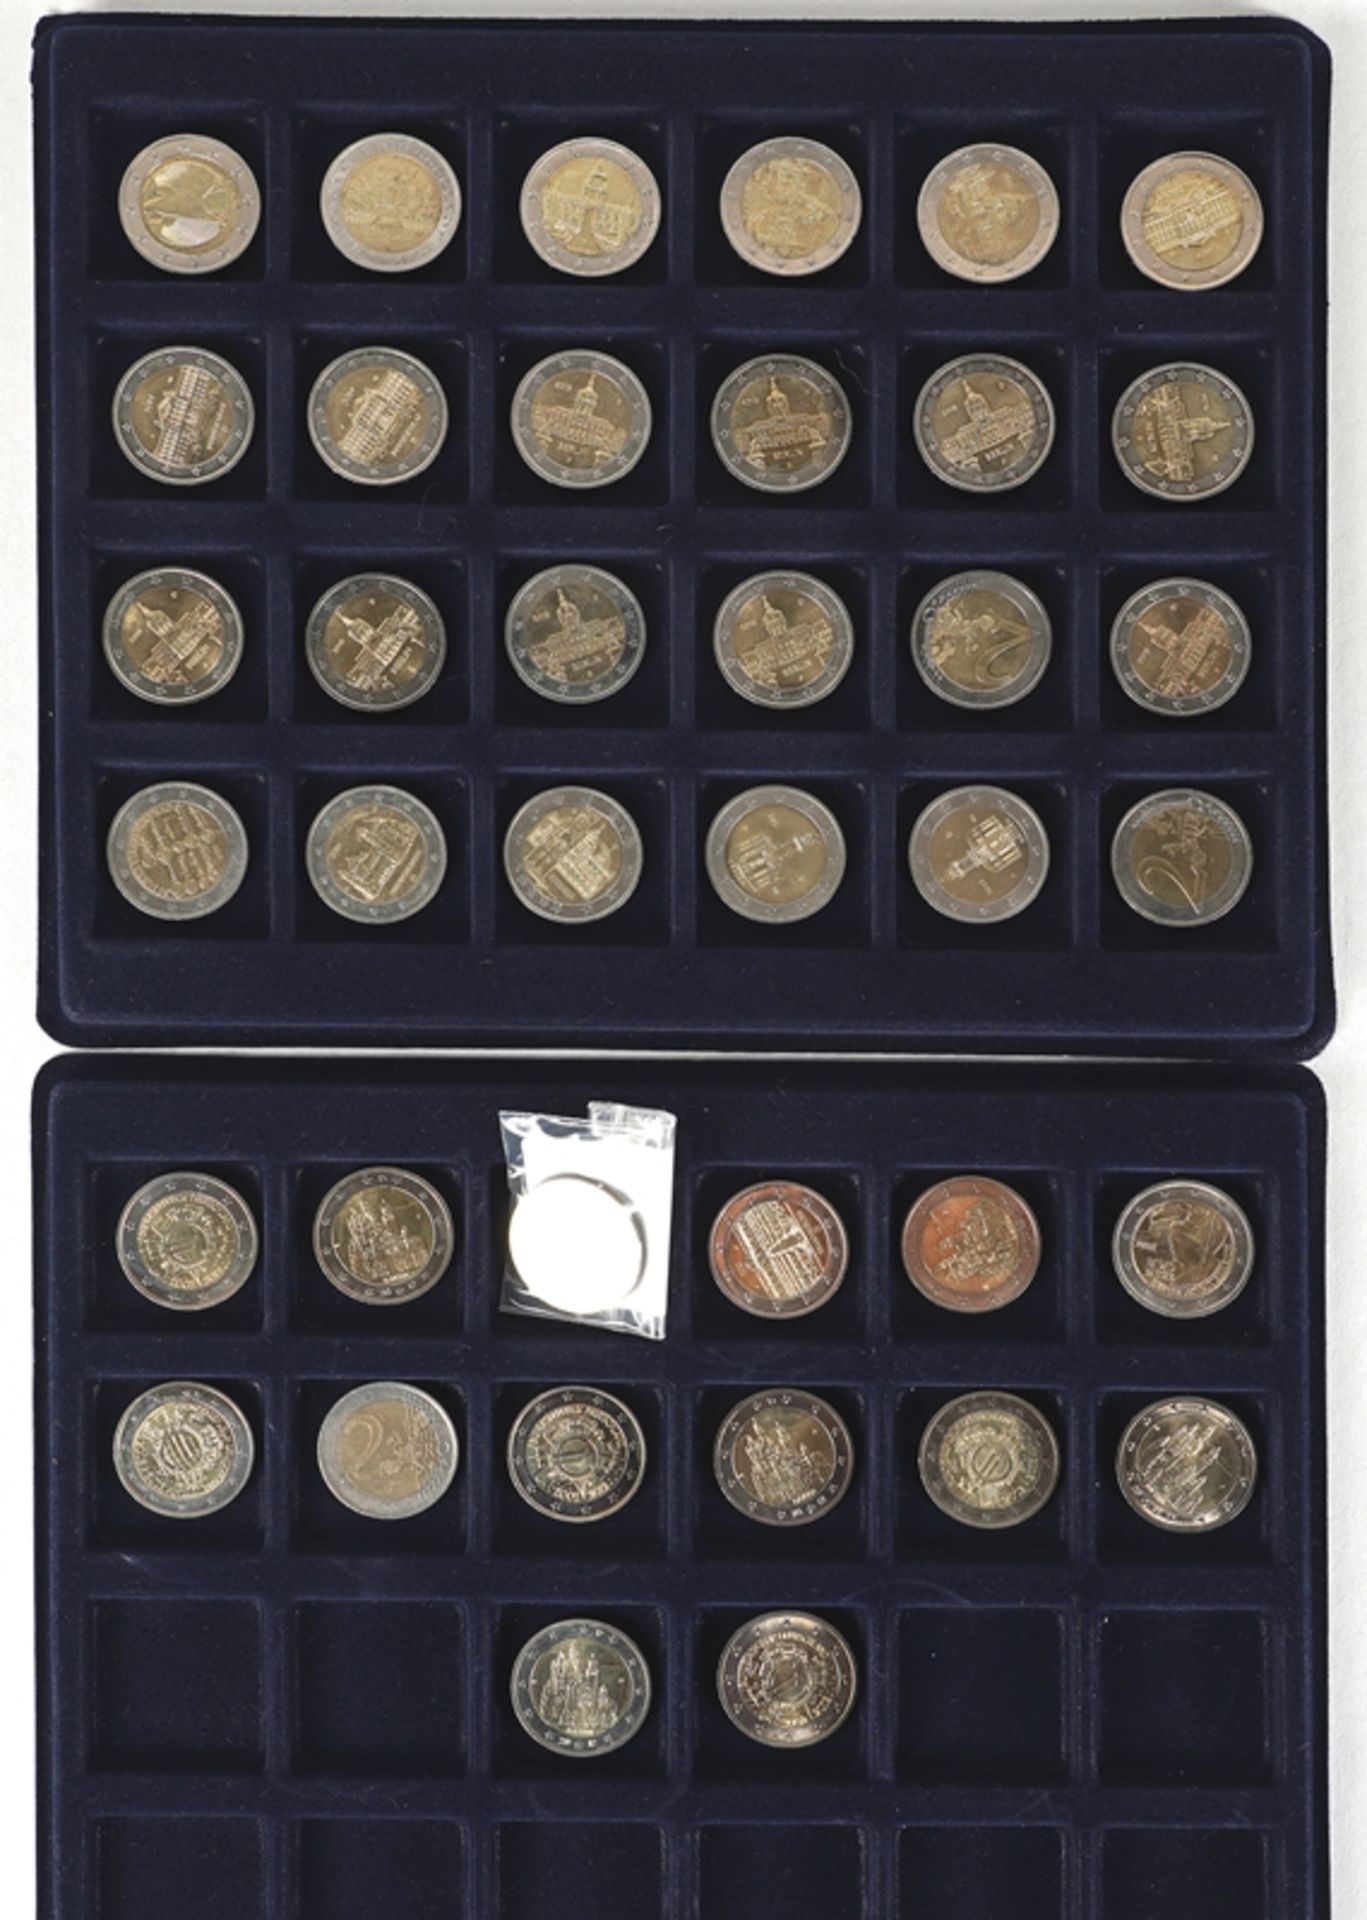 Münzkoffer | Coin case - Image 5 of 6